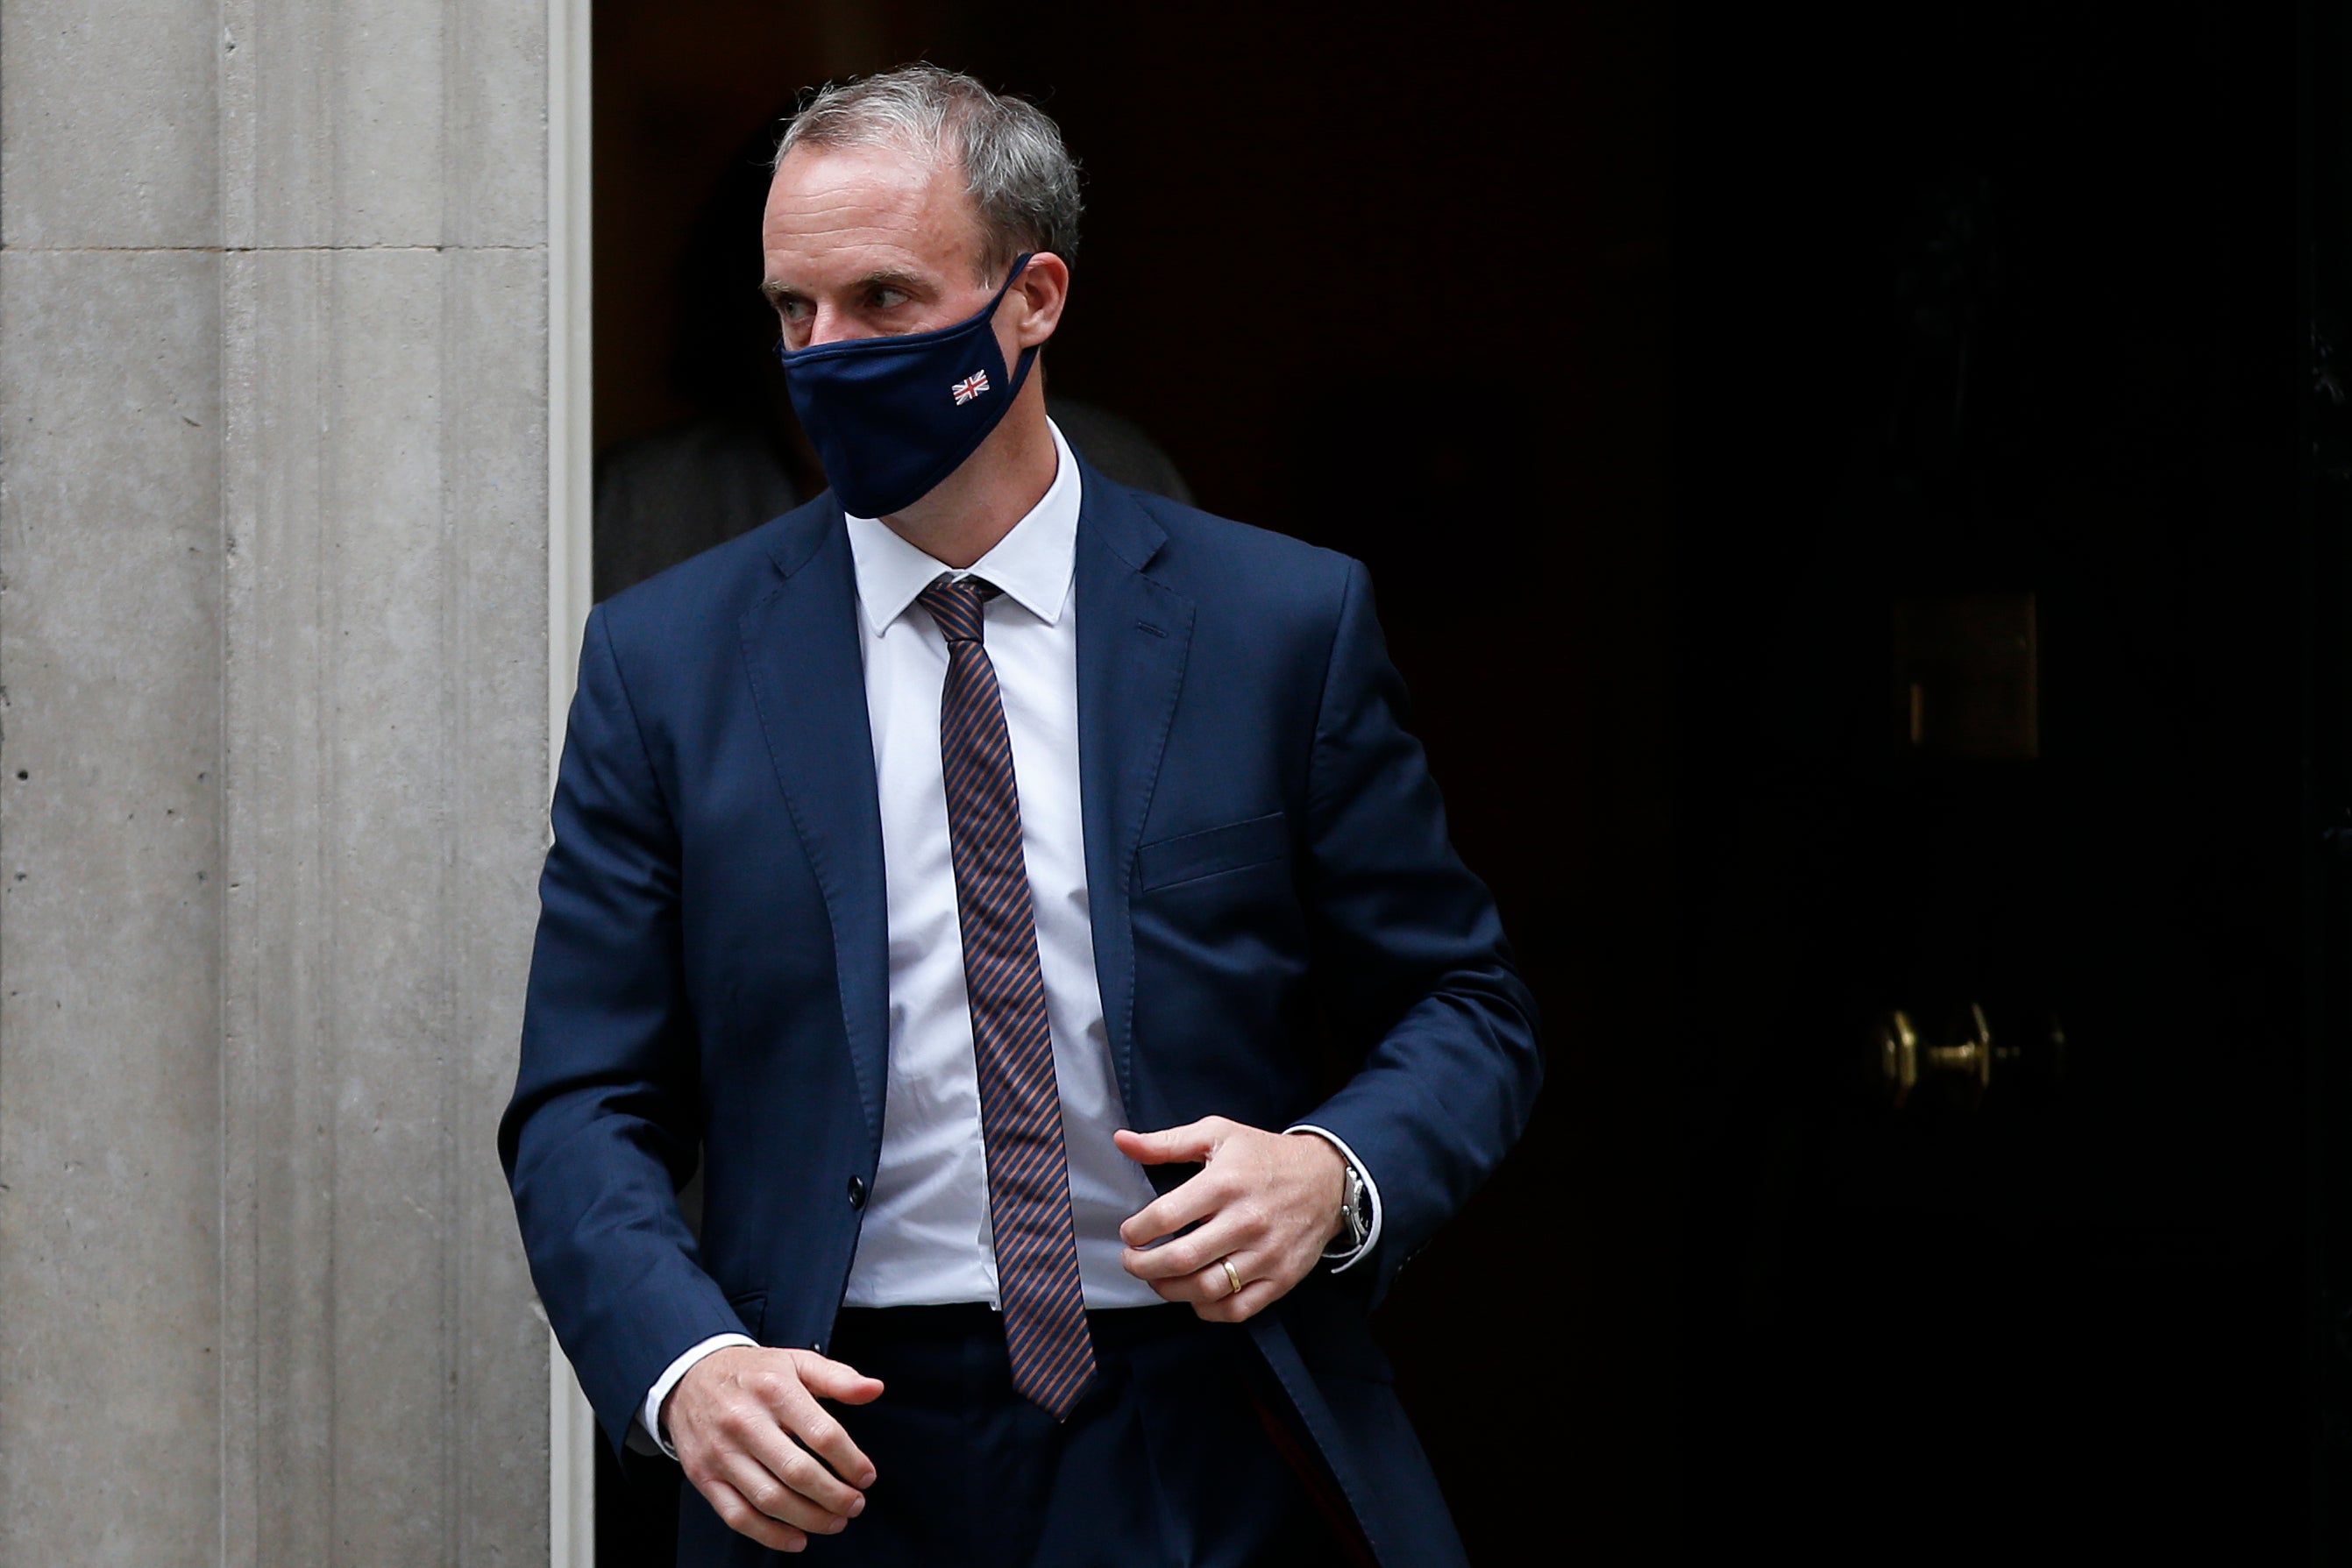 Dominic Raab was spotted sunning himself on holiday at a five-star resort in Crete, according to reports